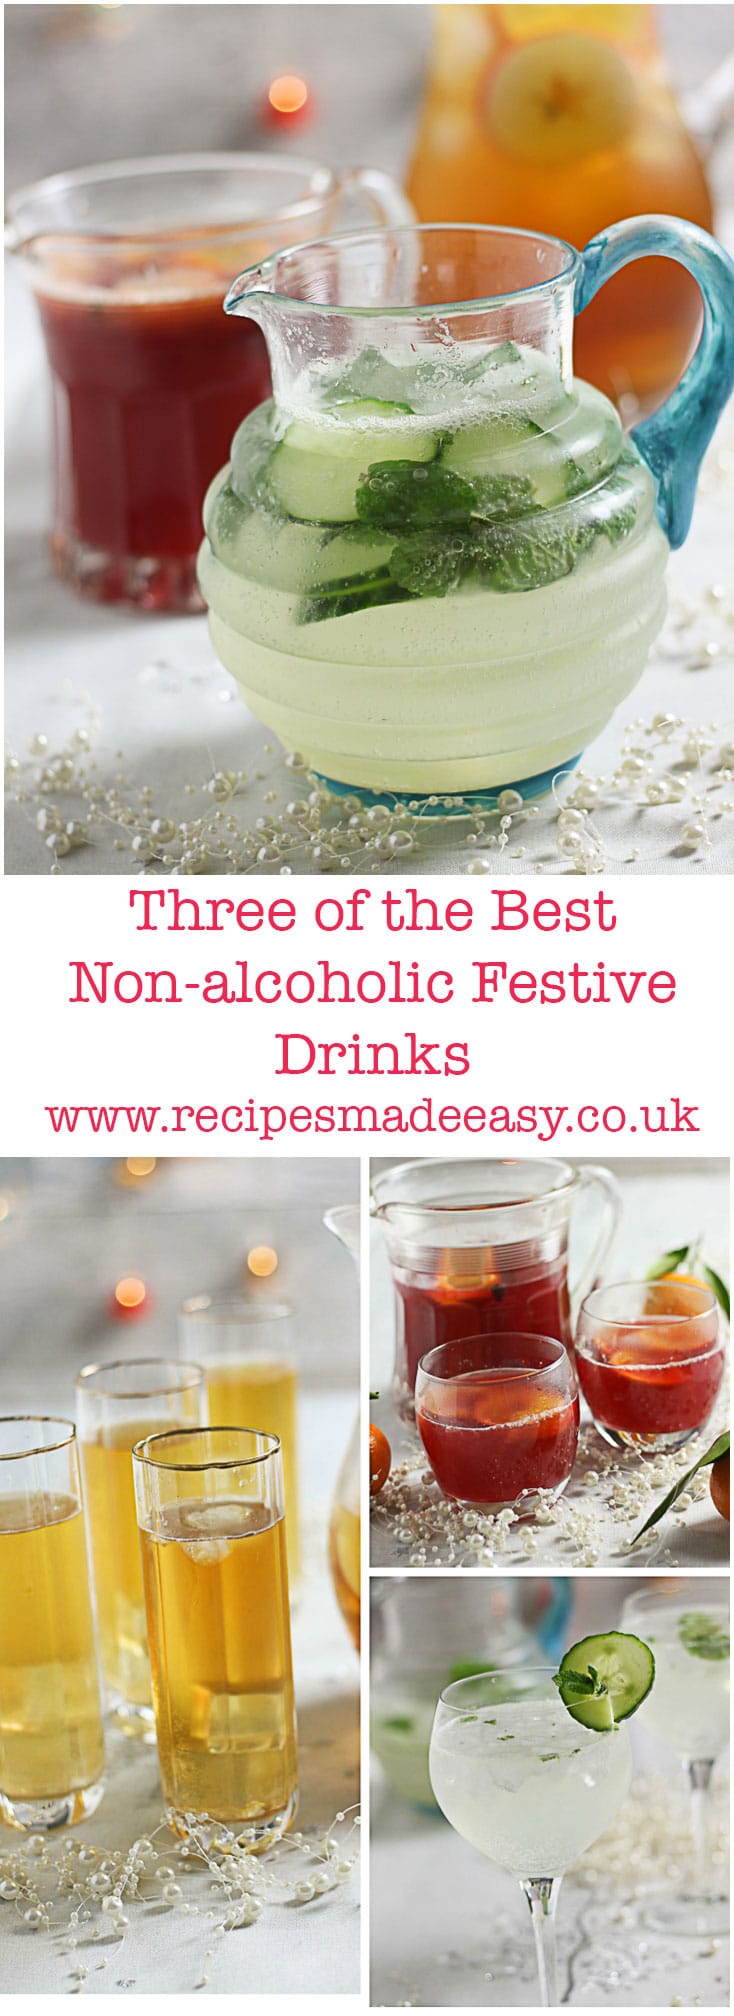 3 of the best non alcoholic festive drinks | Recipes Made Easy